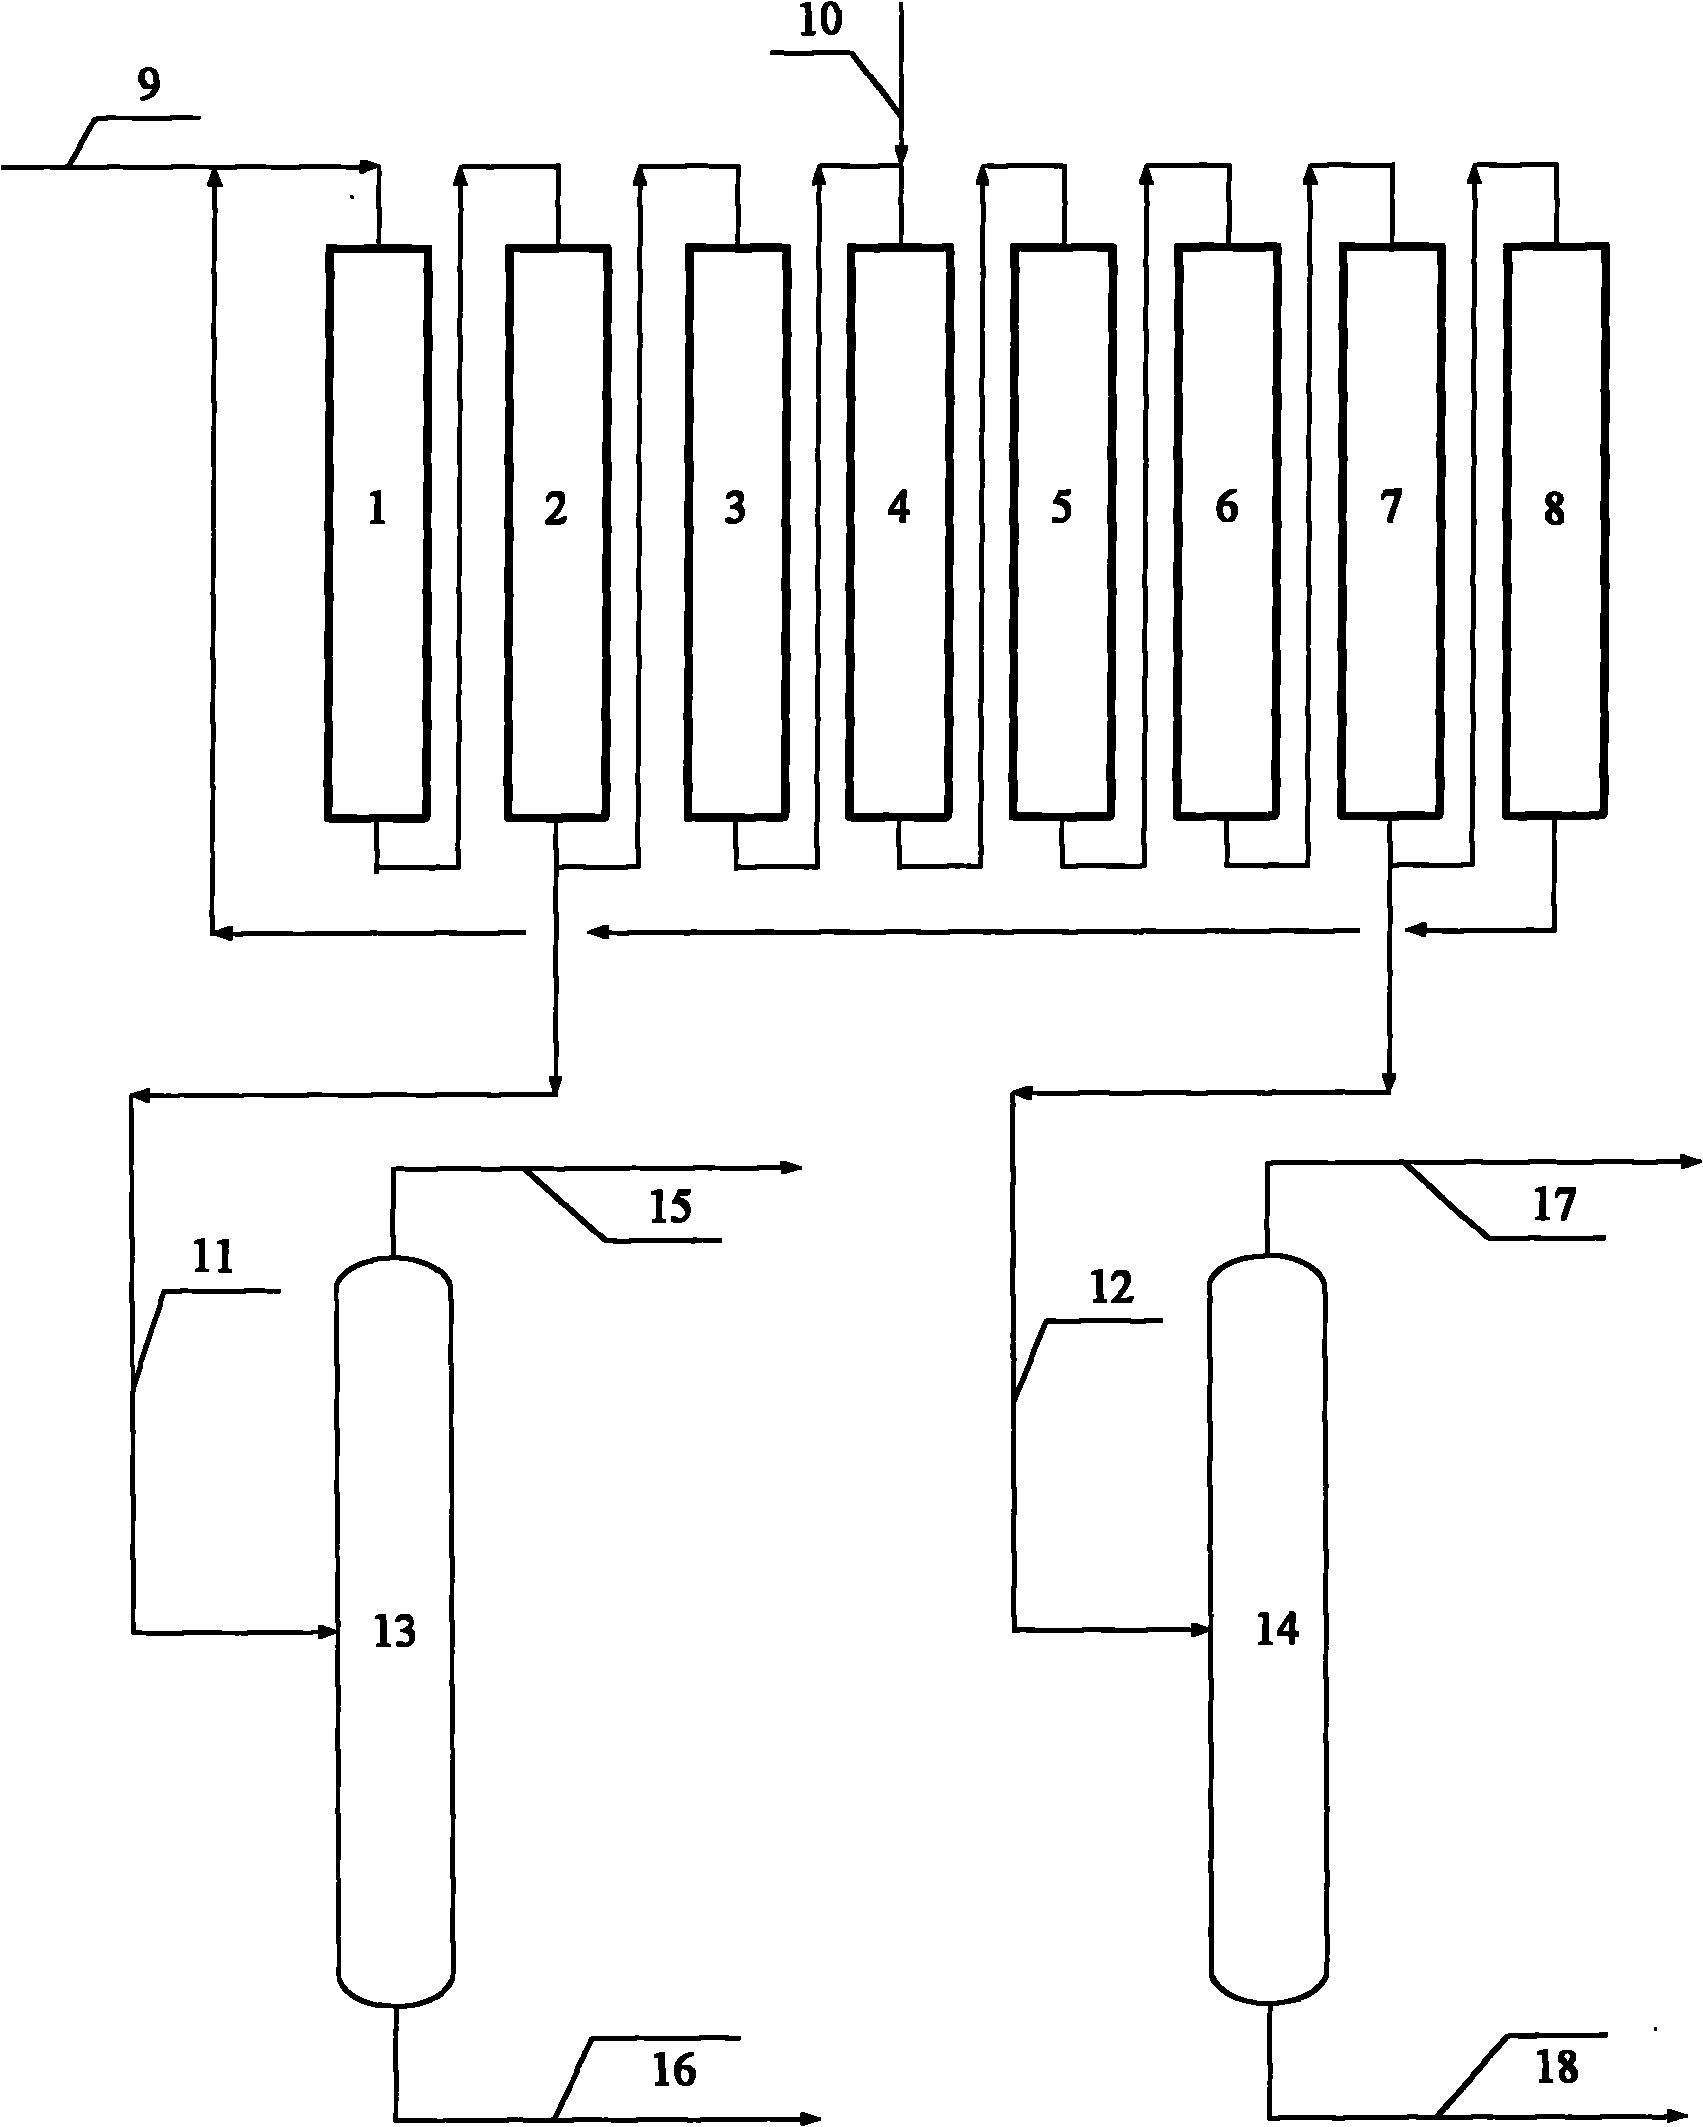 Method for separating glycol and butylene glycol